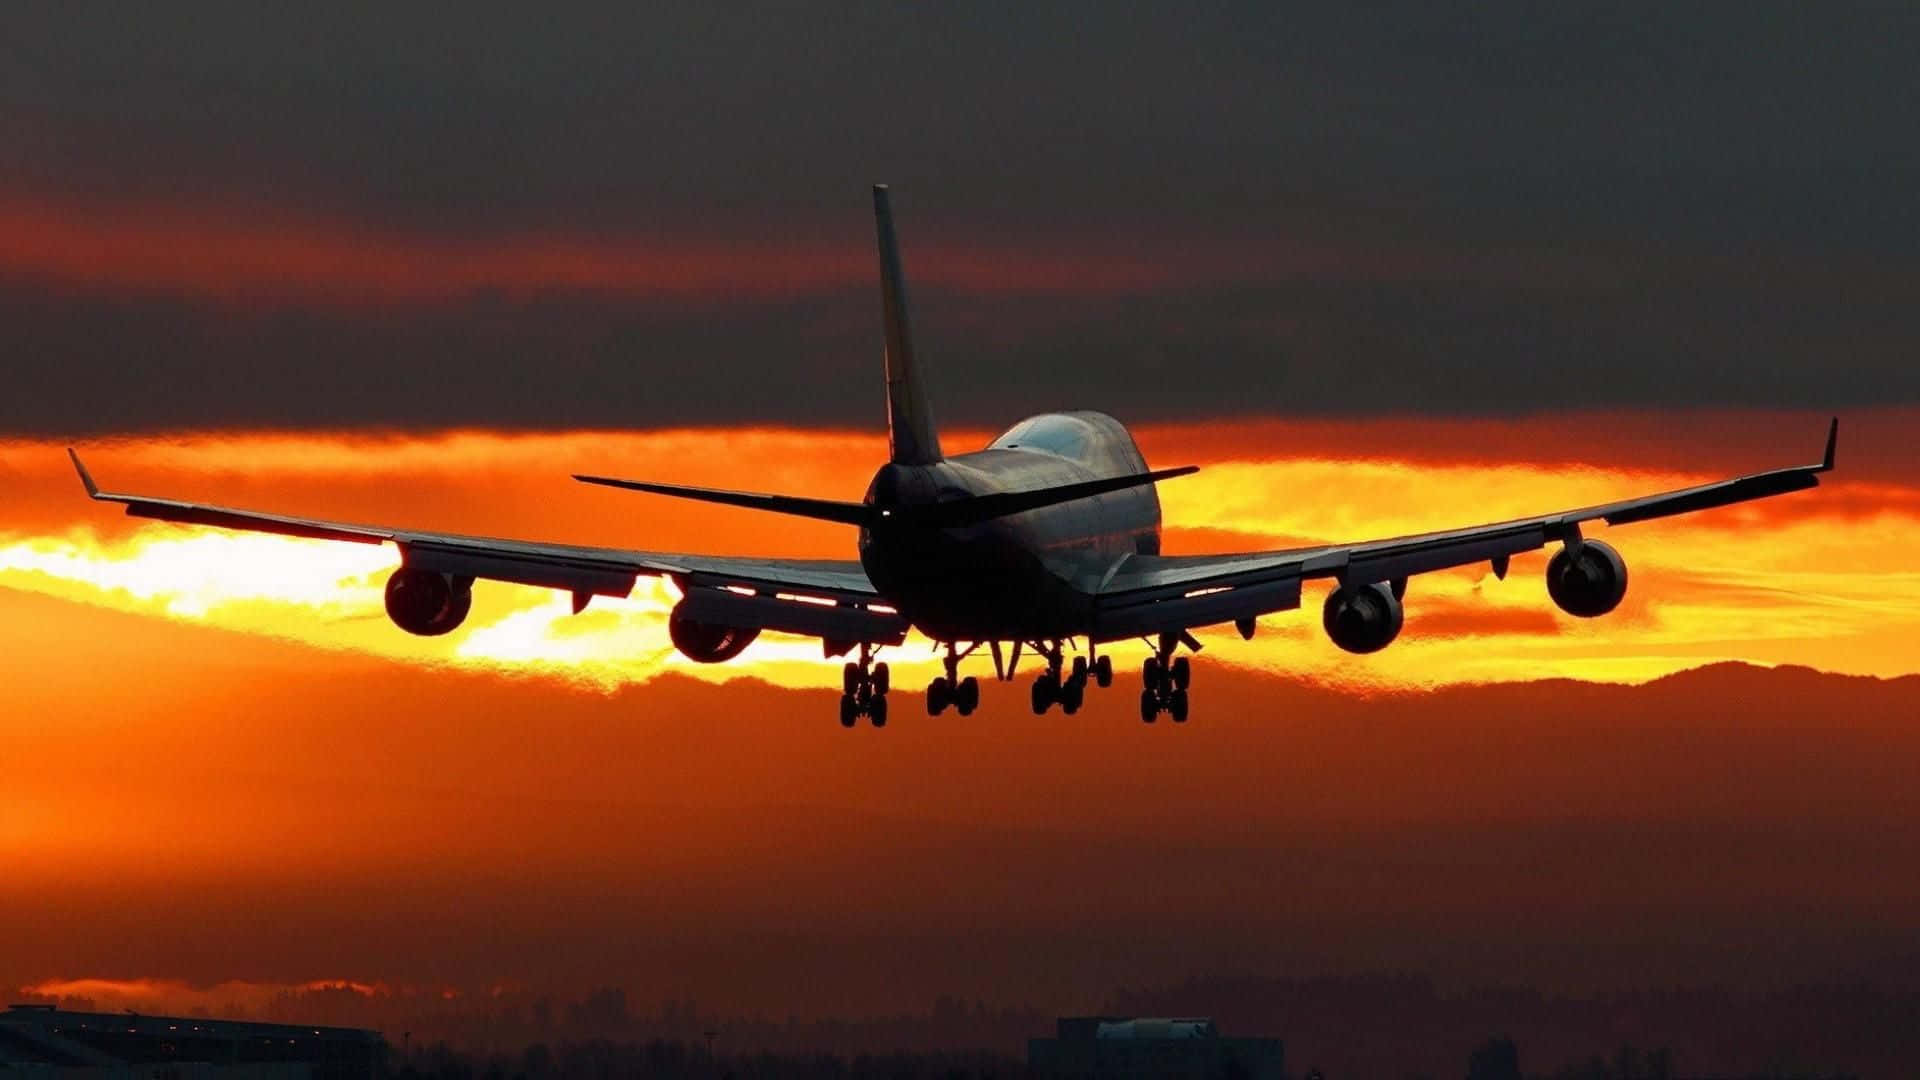 "Travel the World on a Boeing 747" Wallpaper